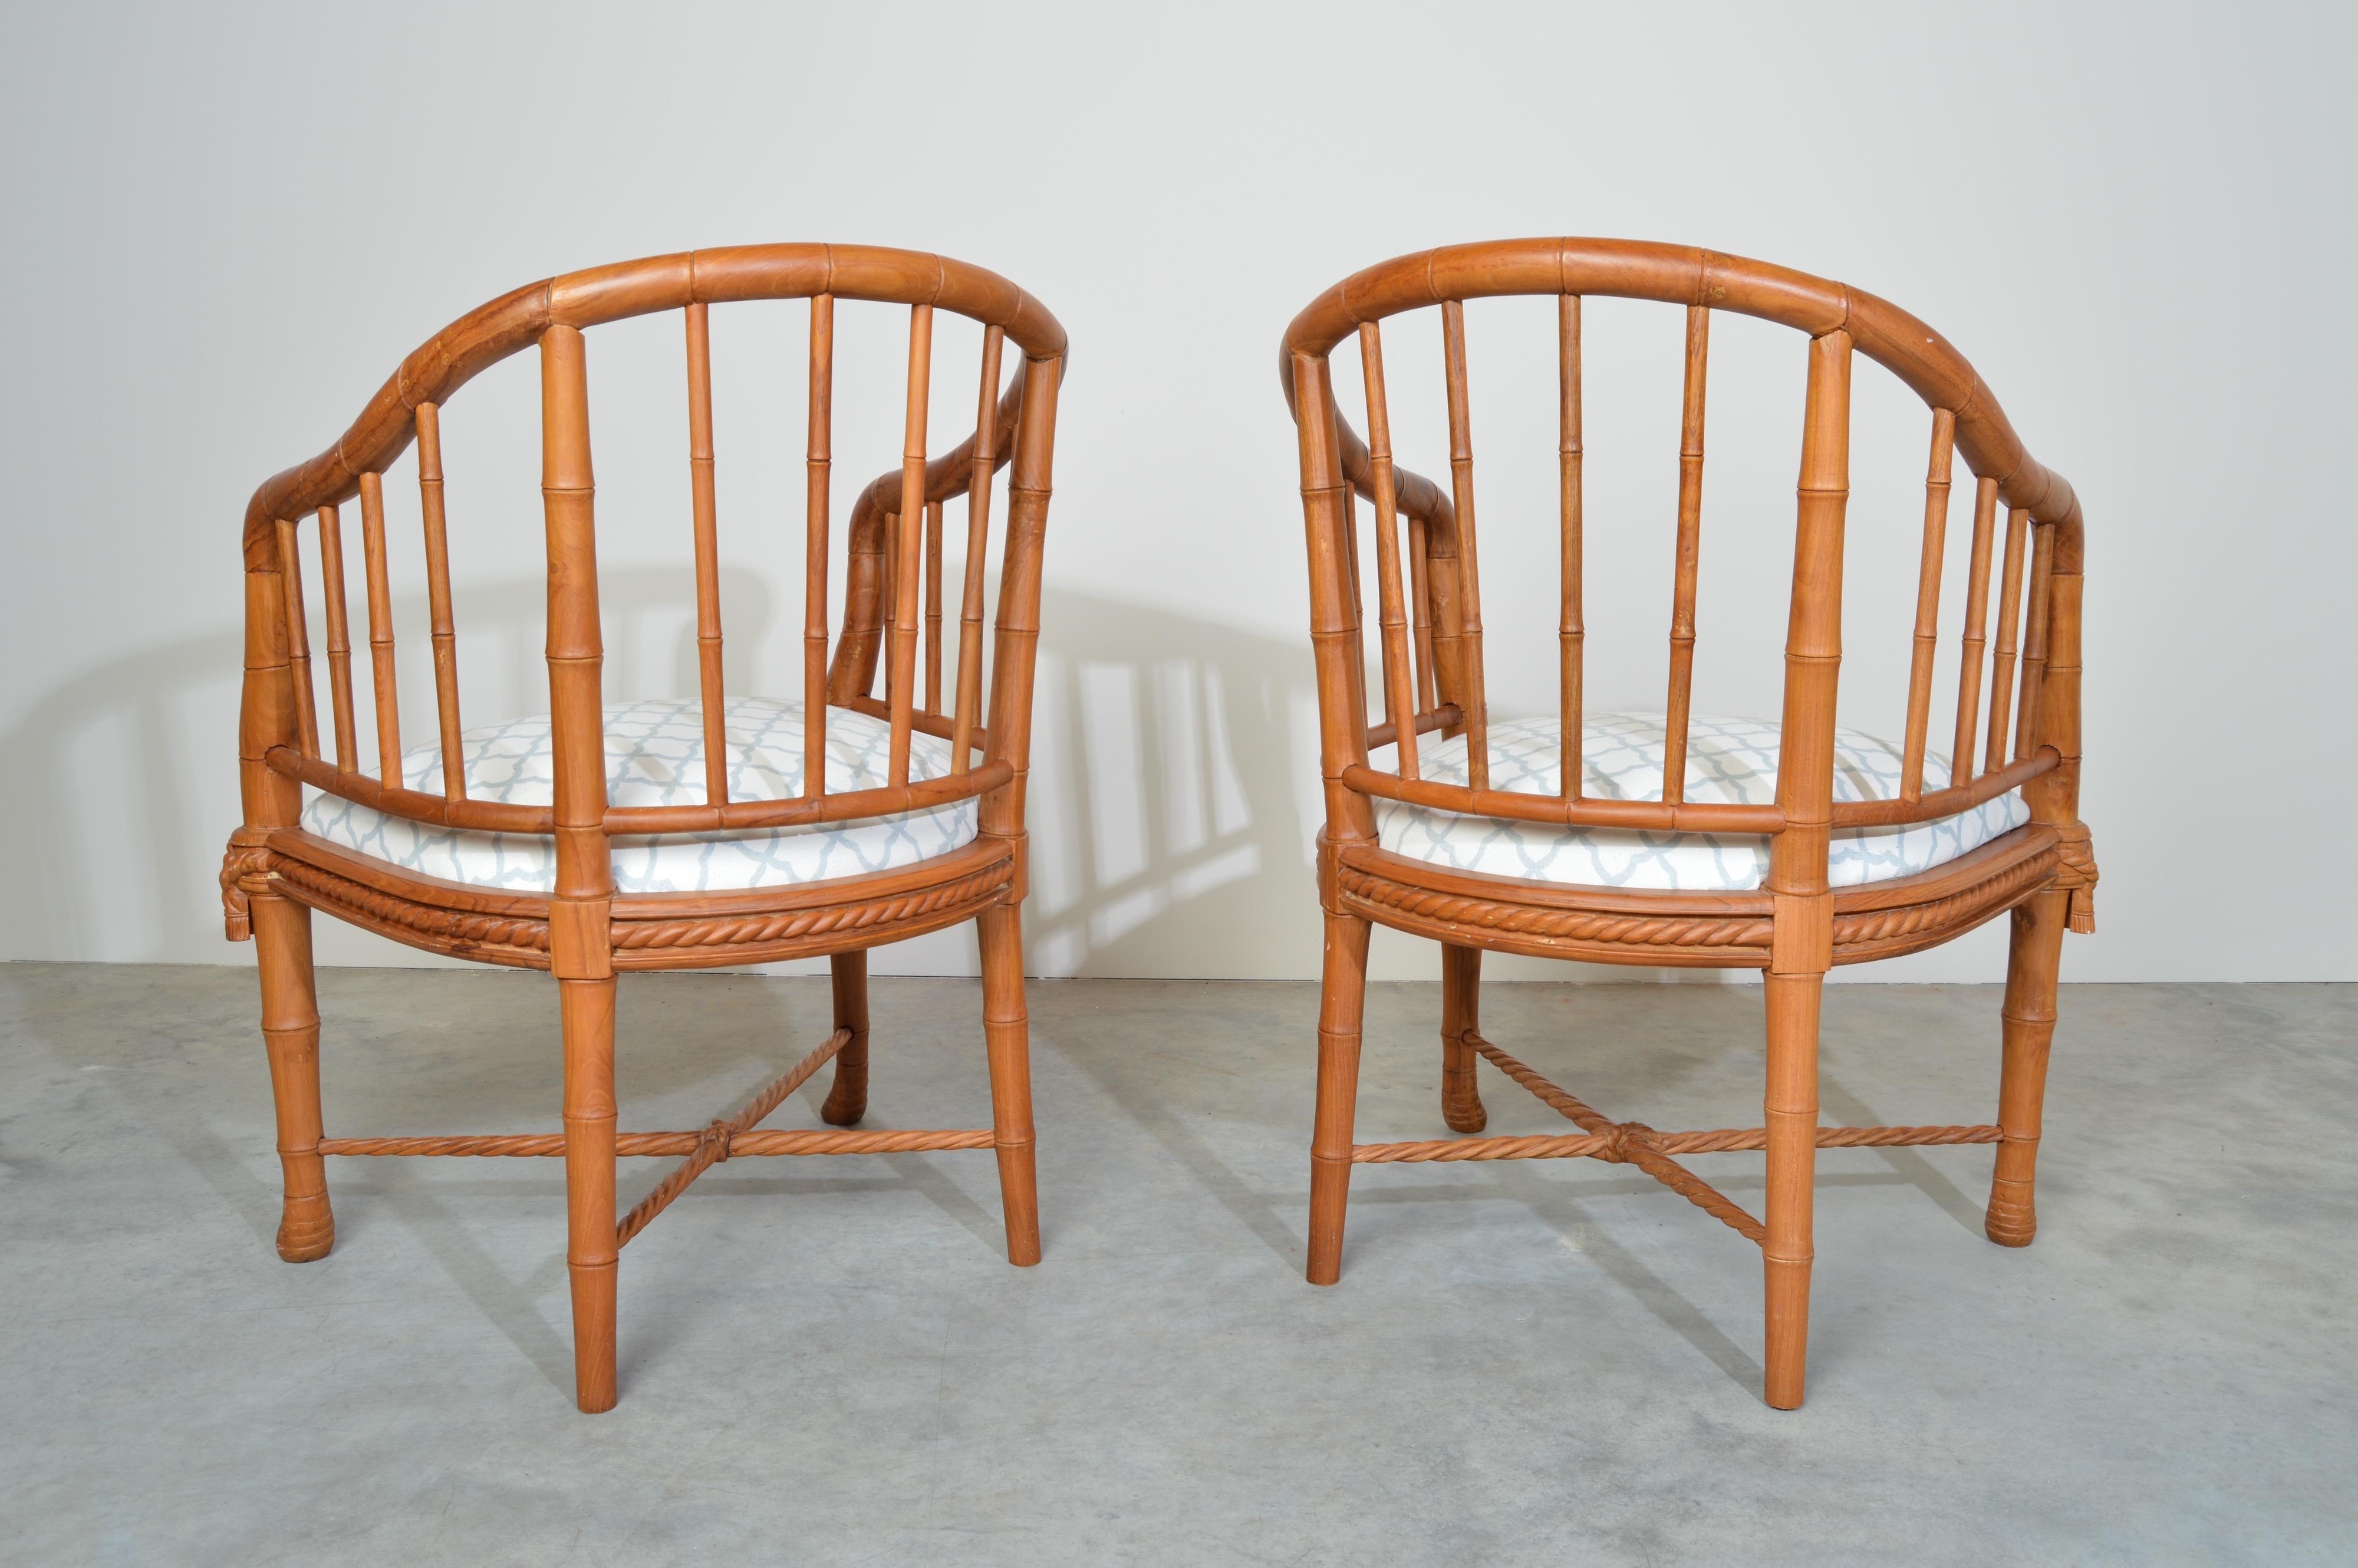 American Hollywood Regency Napoleon Style Faux Bamboo Barrel Back Chairs in Teak